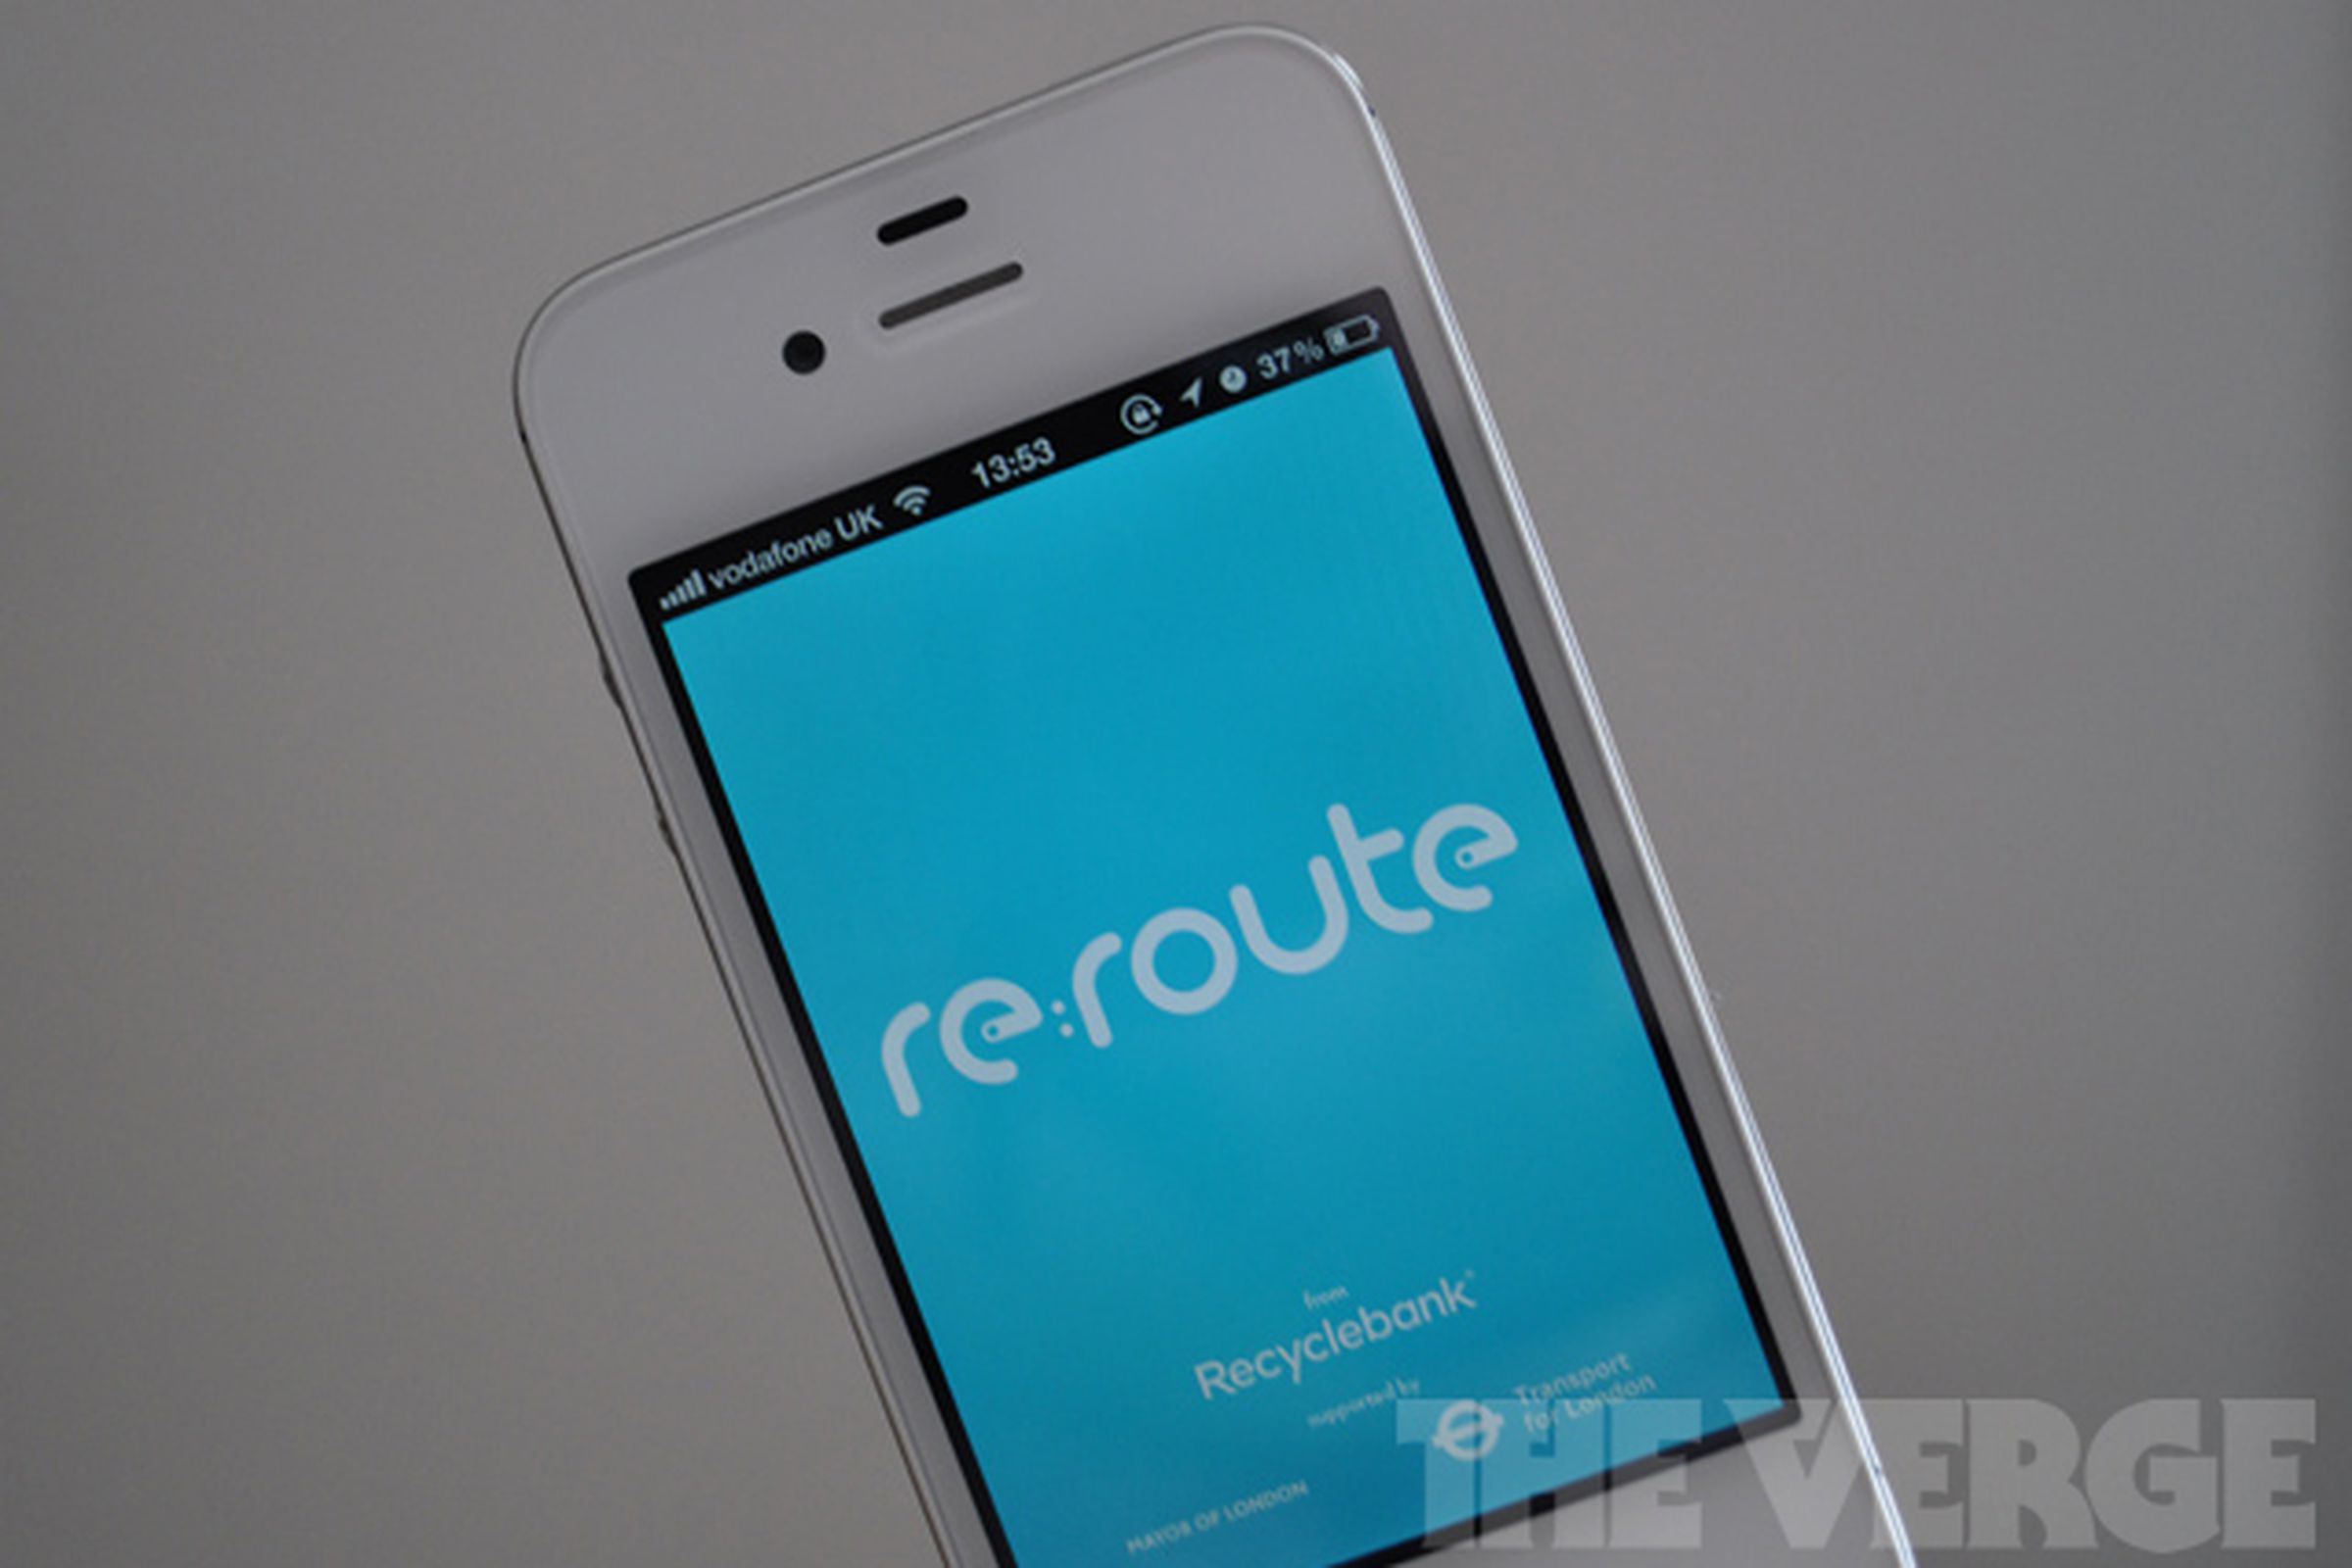 re:route